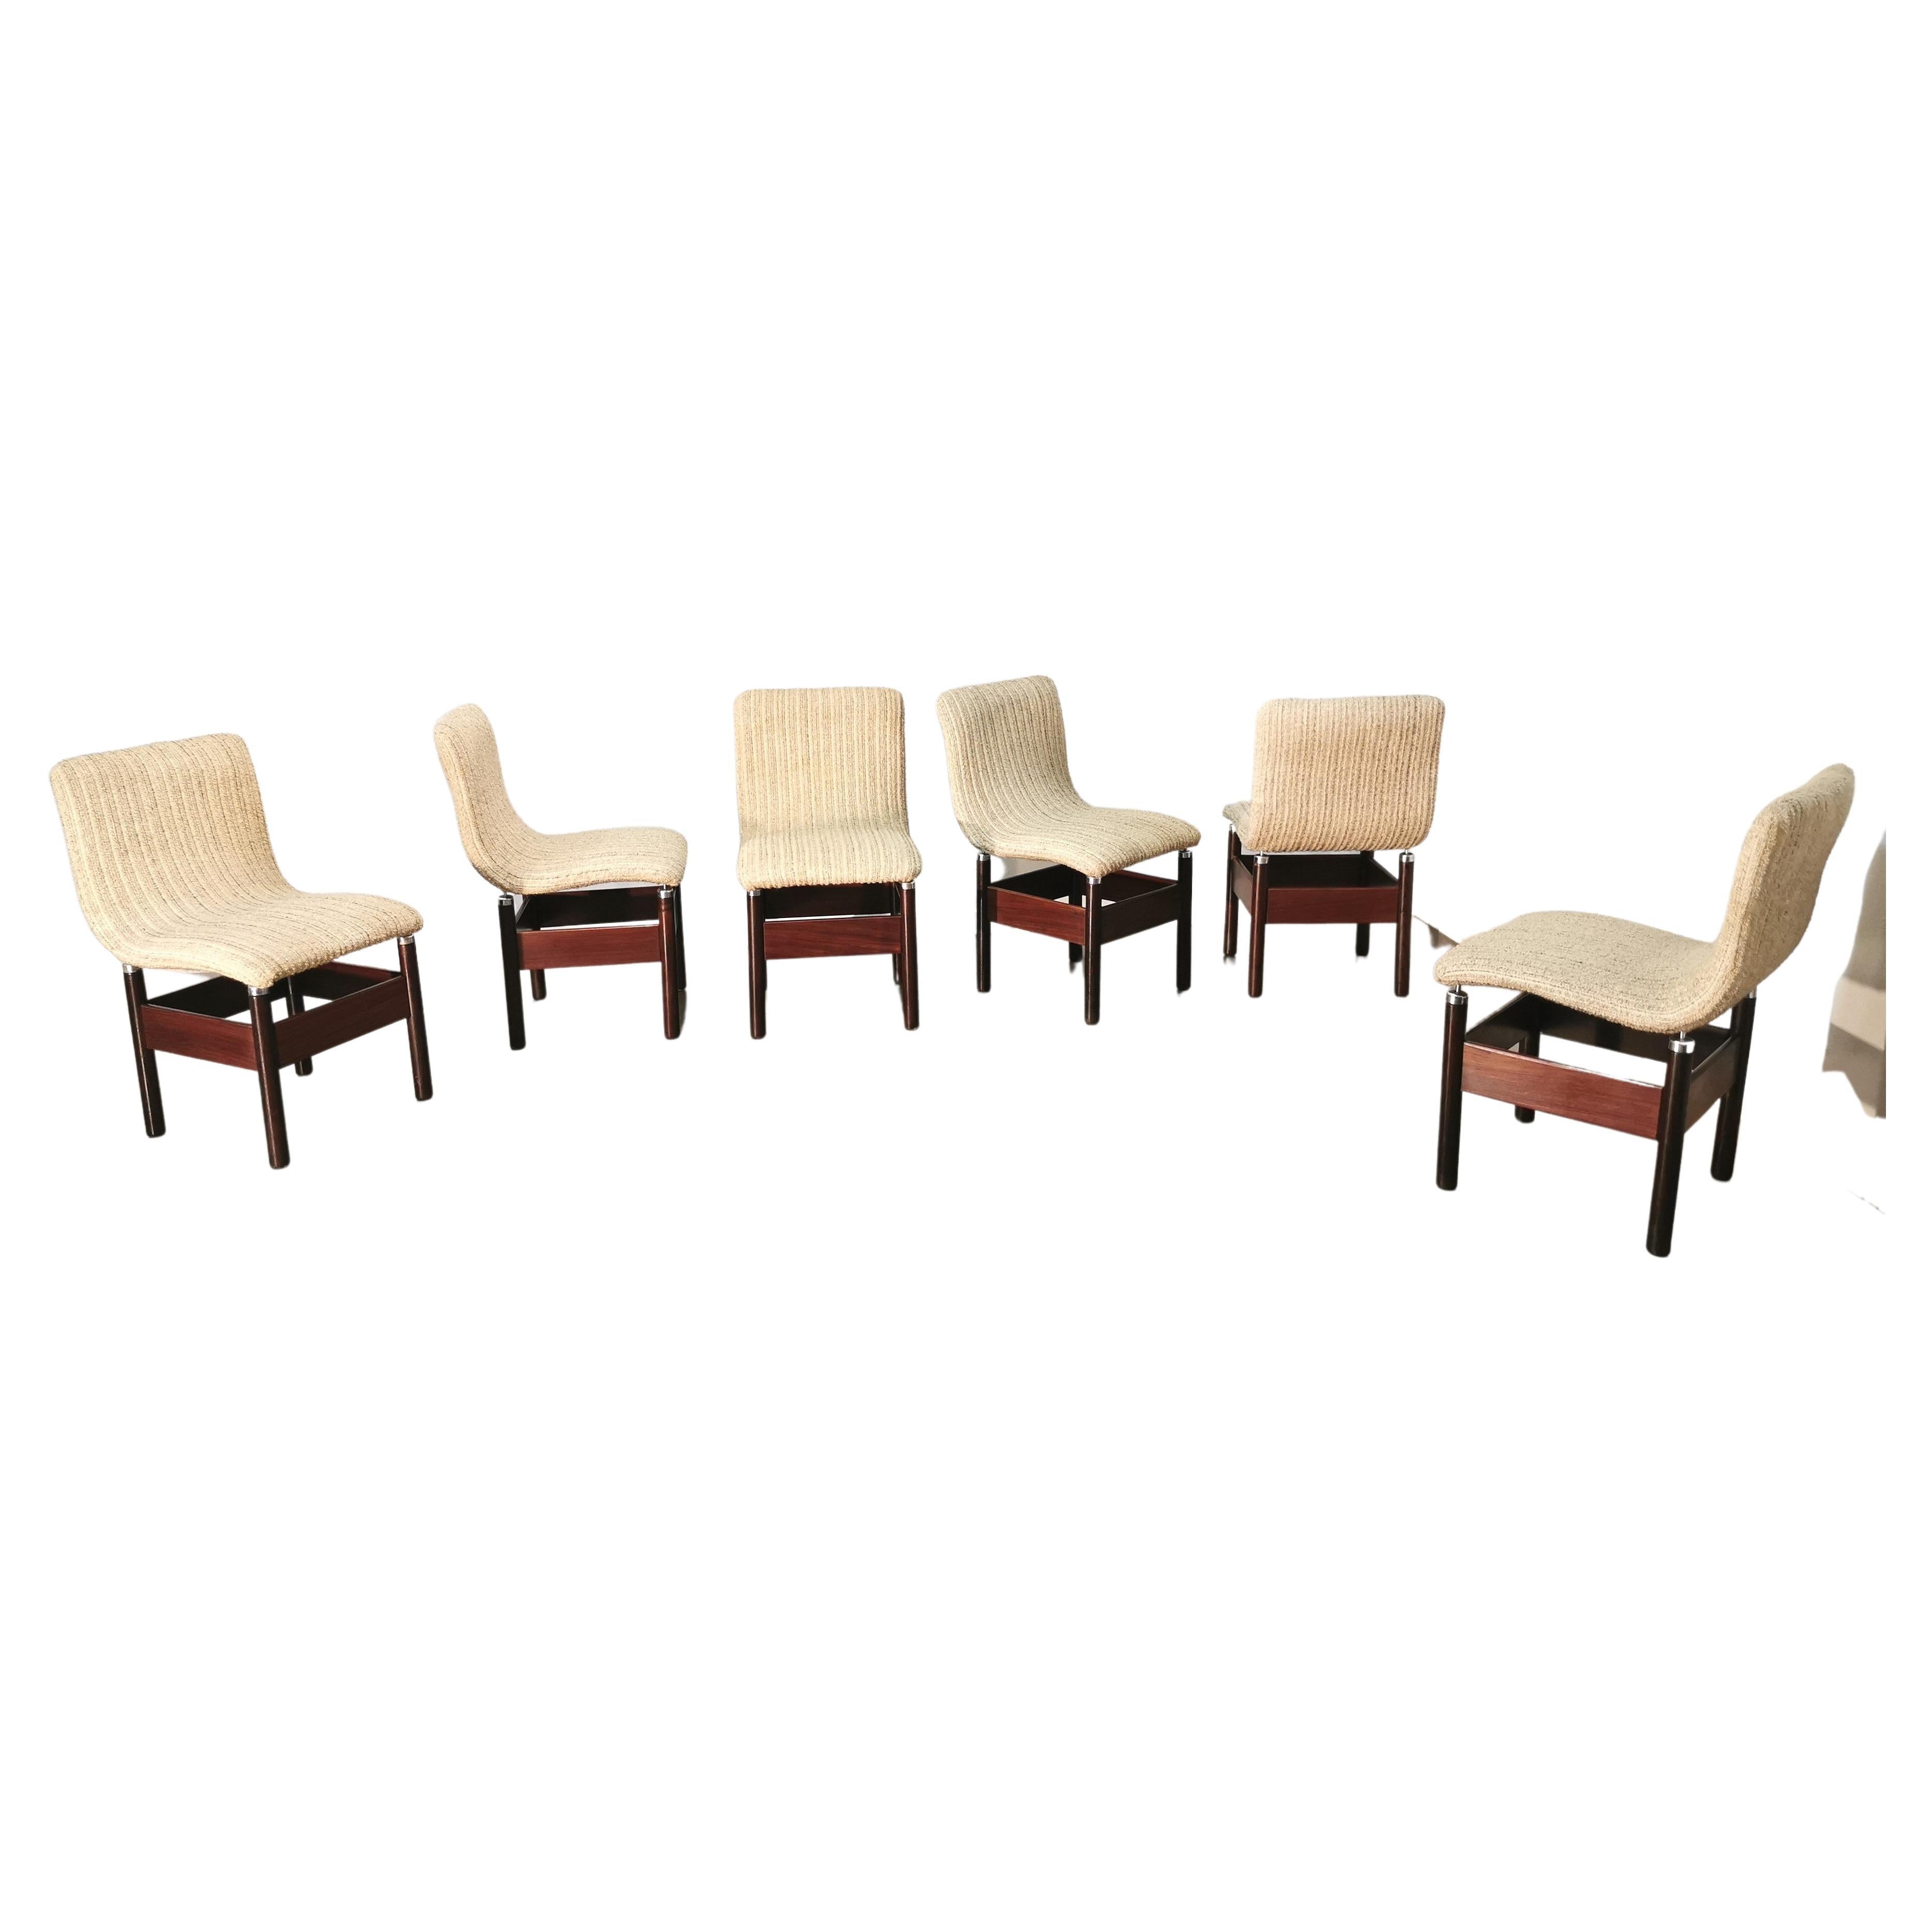 Dining Room Chairs Wool Wood by Vittorio Introini for Saporiti 1960s Set of 6